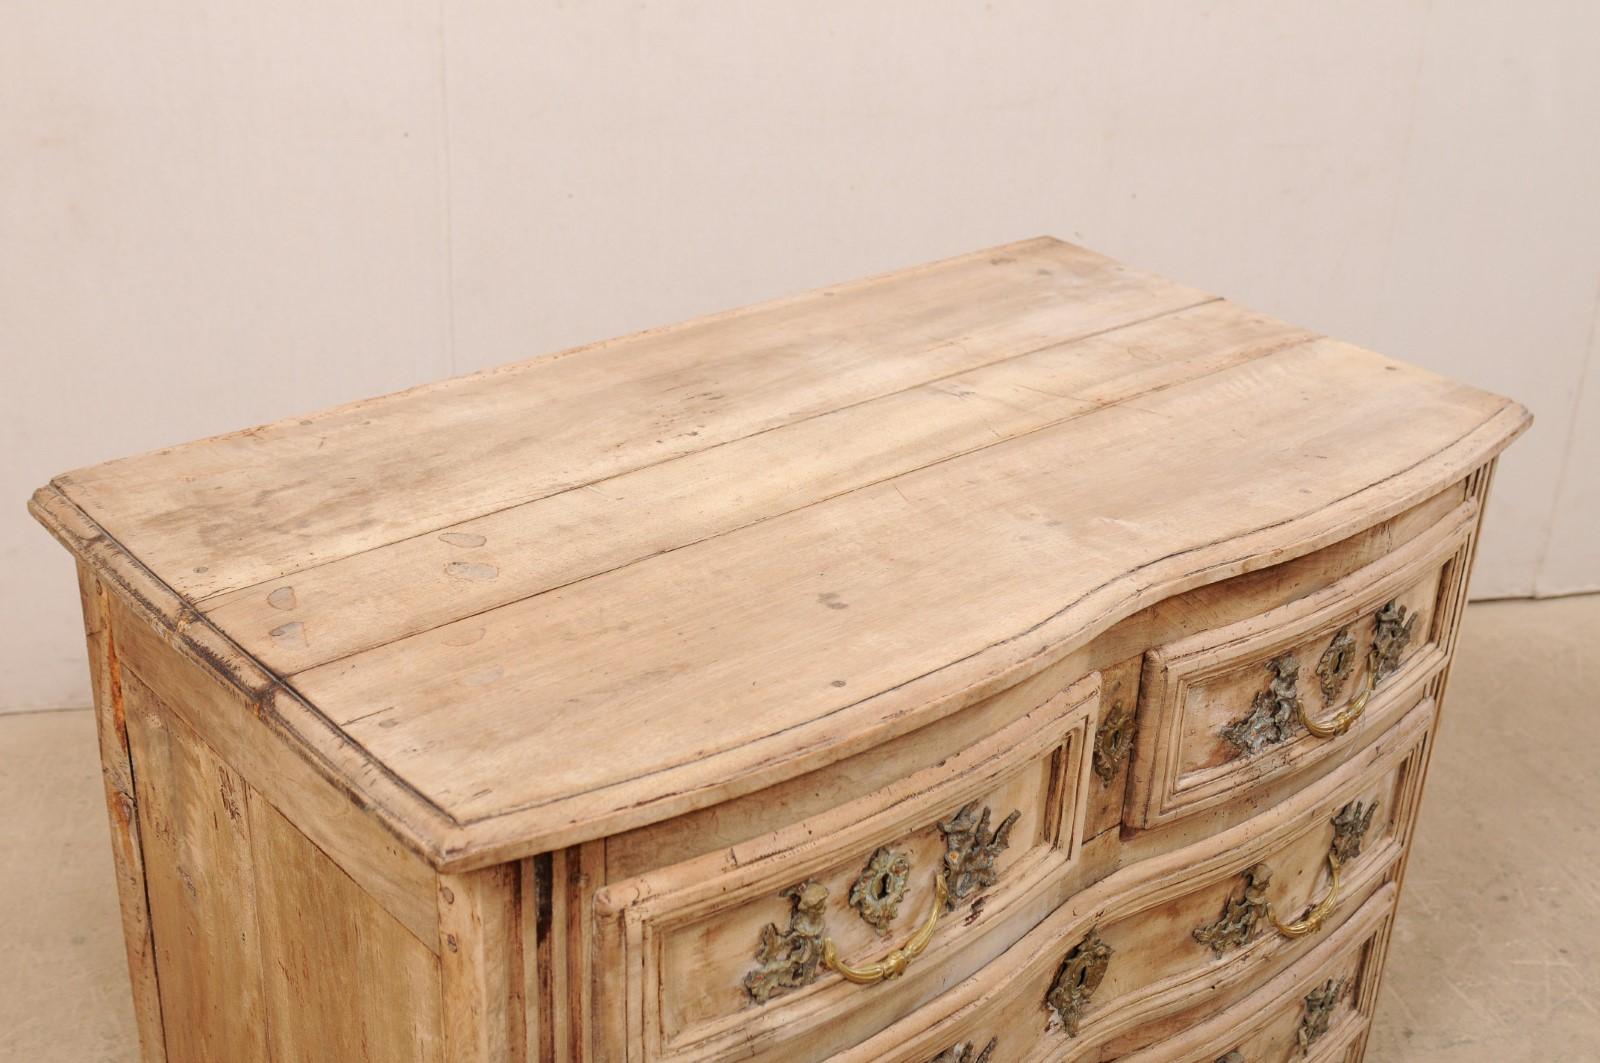 18th Century French Period Rococo Serpentine Front Carved-Wood Chest with Elaborate Hardware